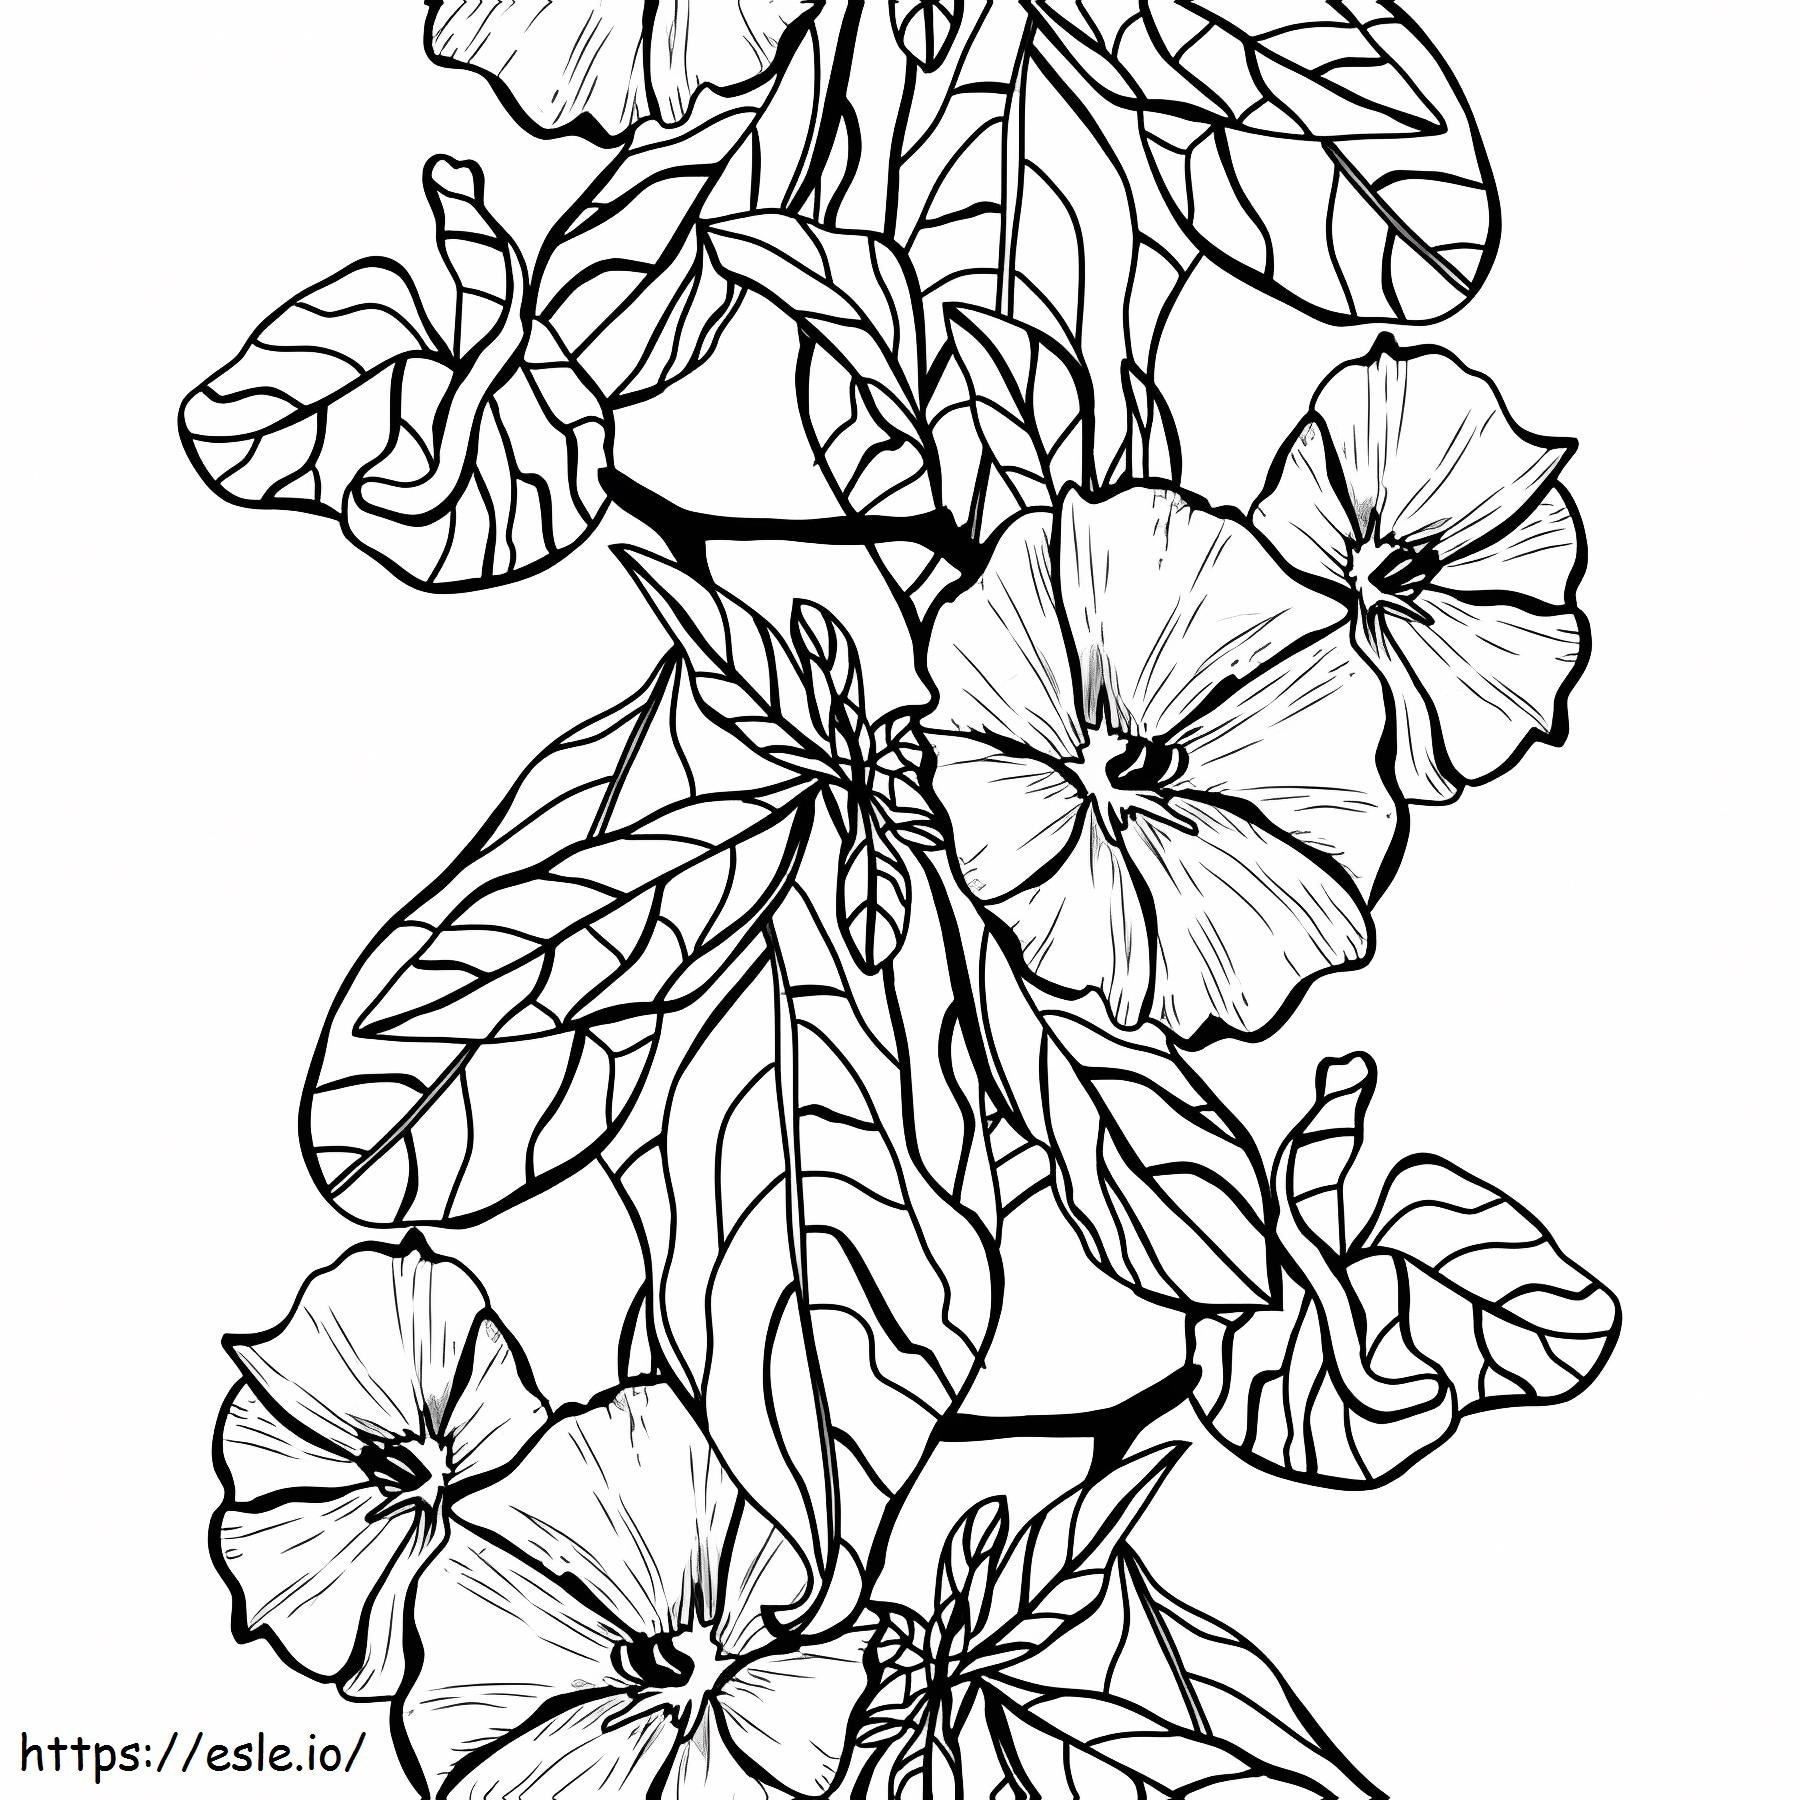 Amazing Clematis coloring page